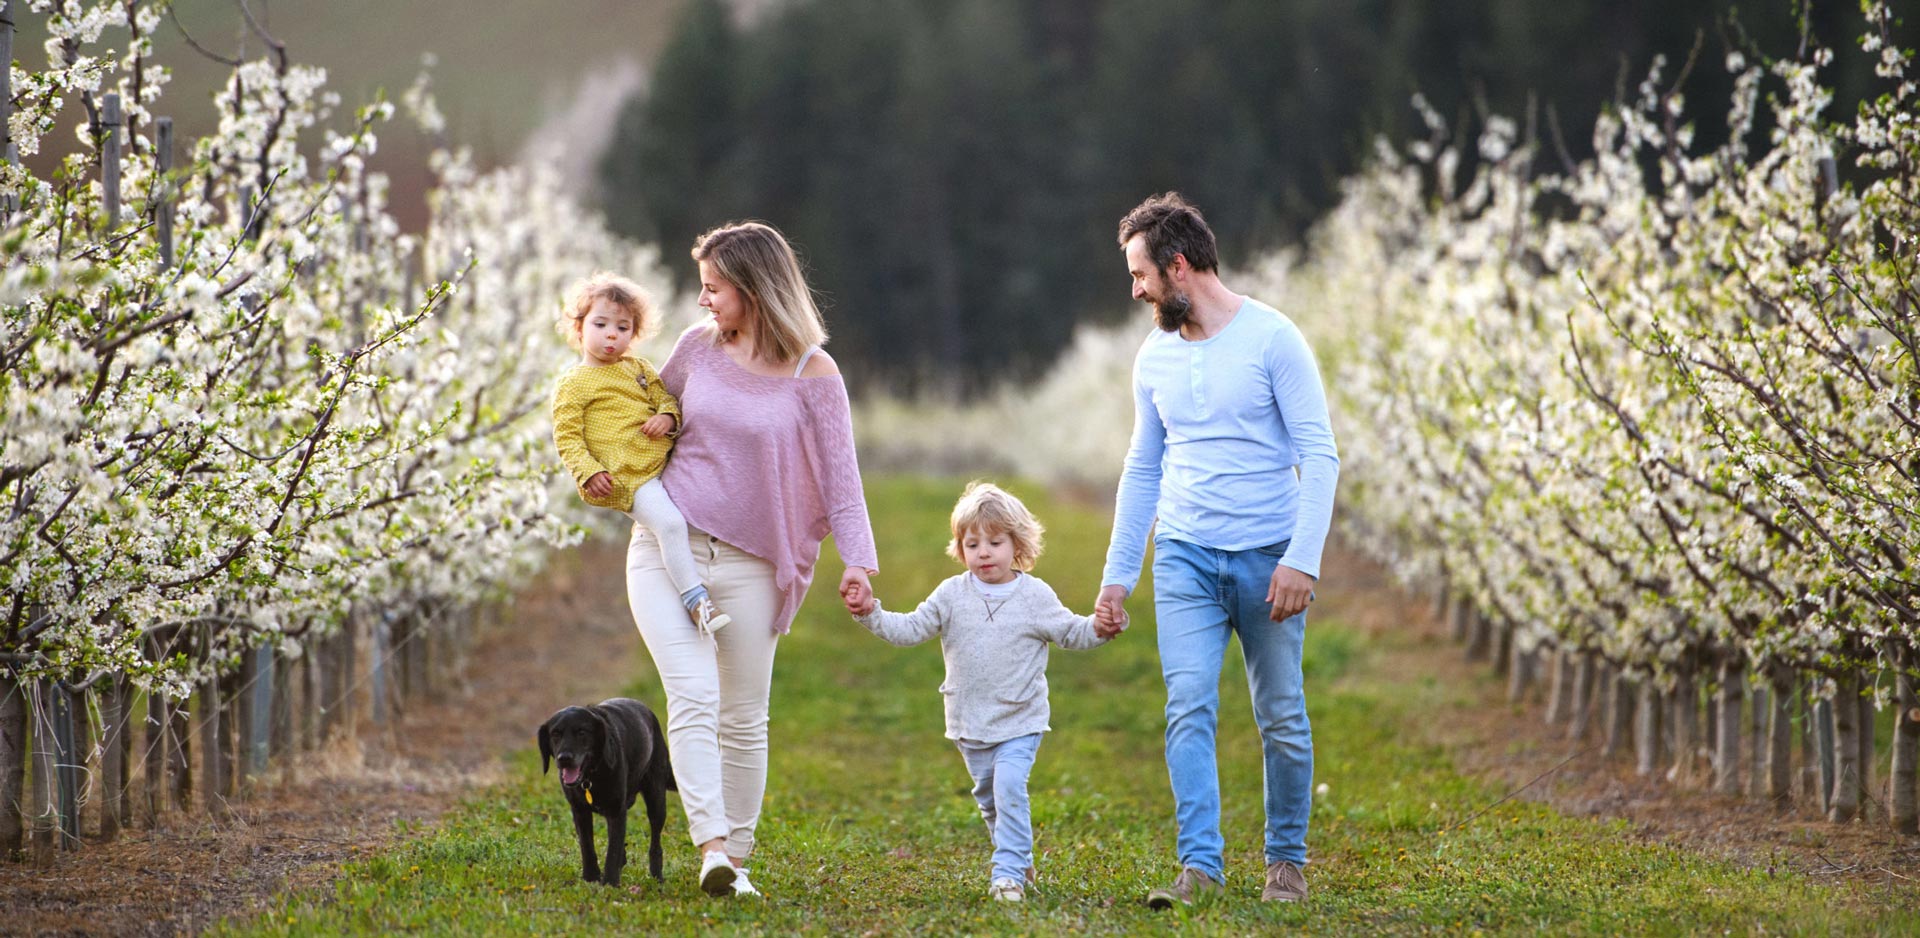 A family walking through an orchard in bloom with their dog